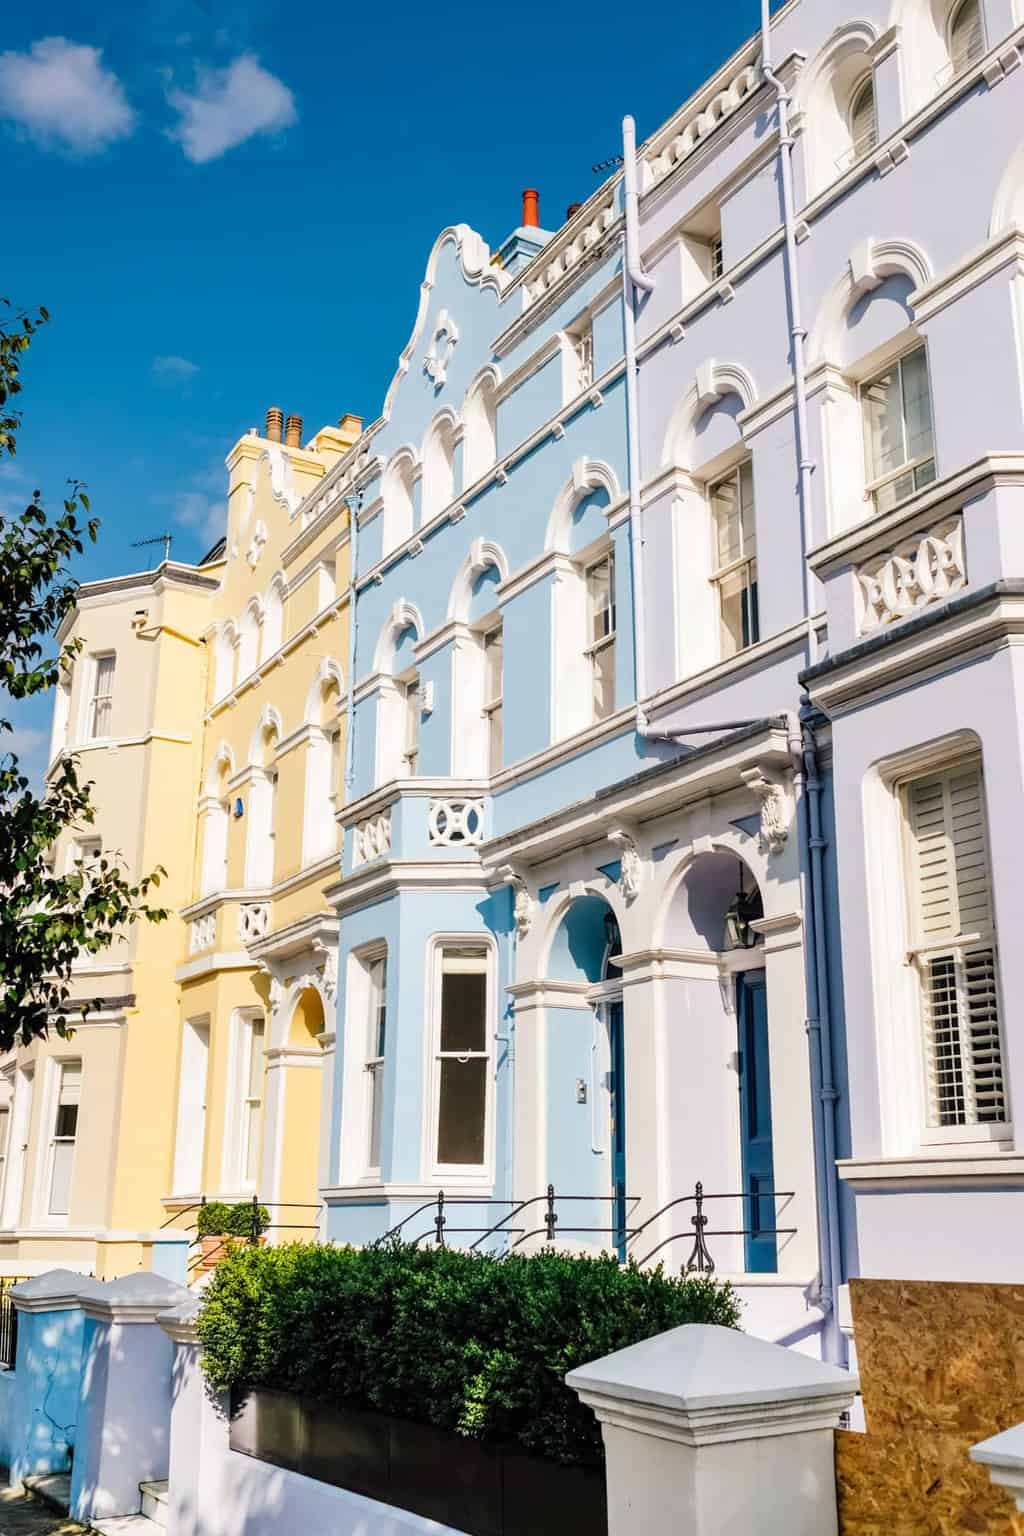 Colorful buildings in Nottinghill! Photos of Our British Isles Cruise with Family! | Part 1 # travel #familytravel #cruise #decor #design #britishisles